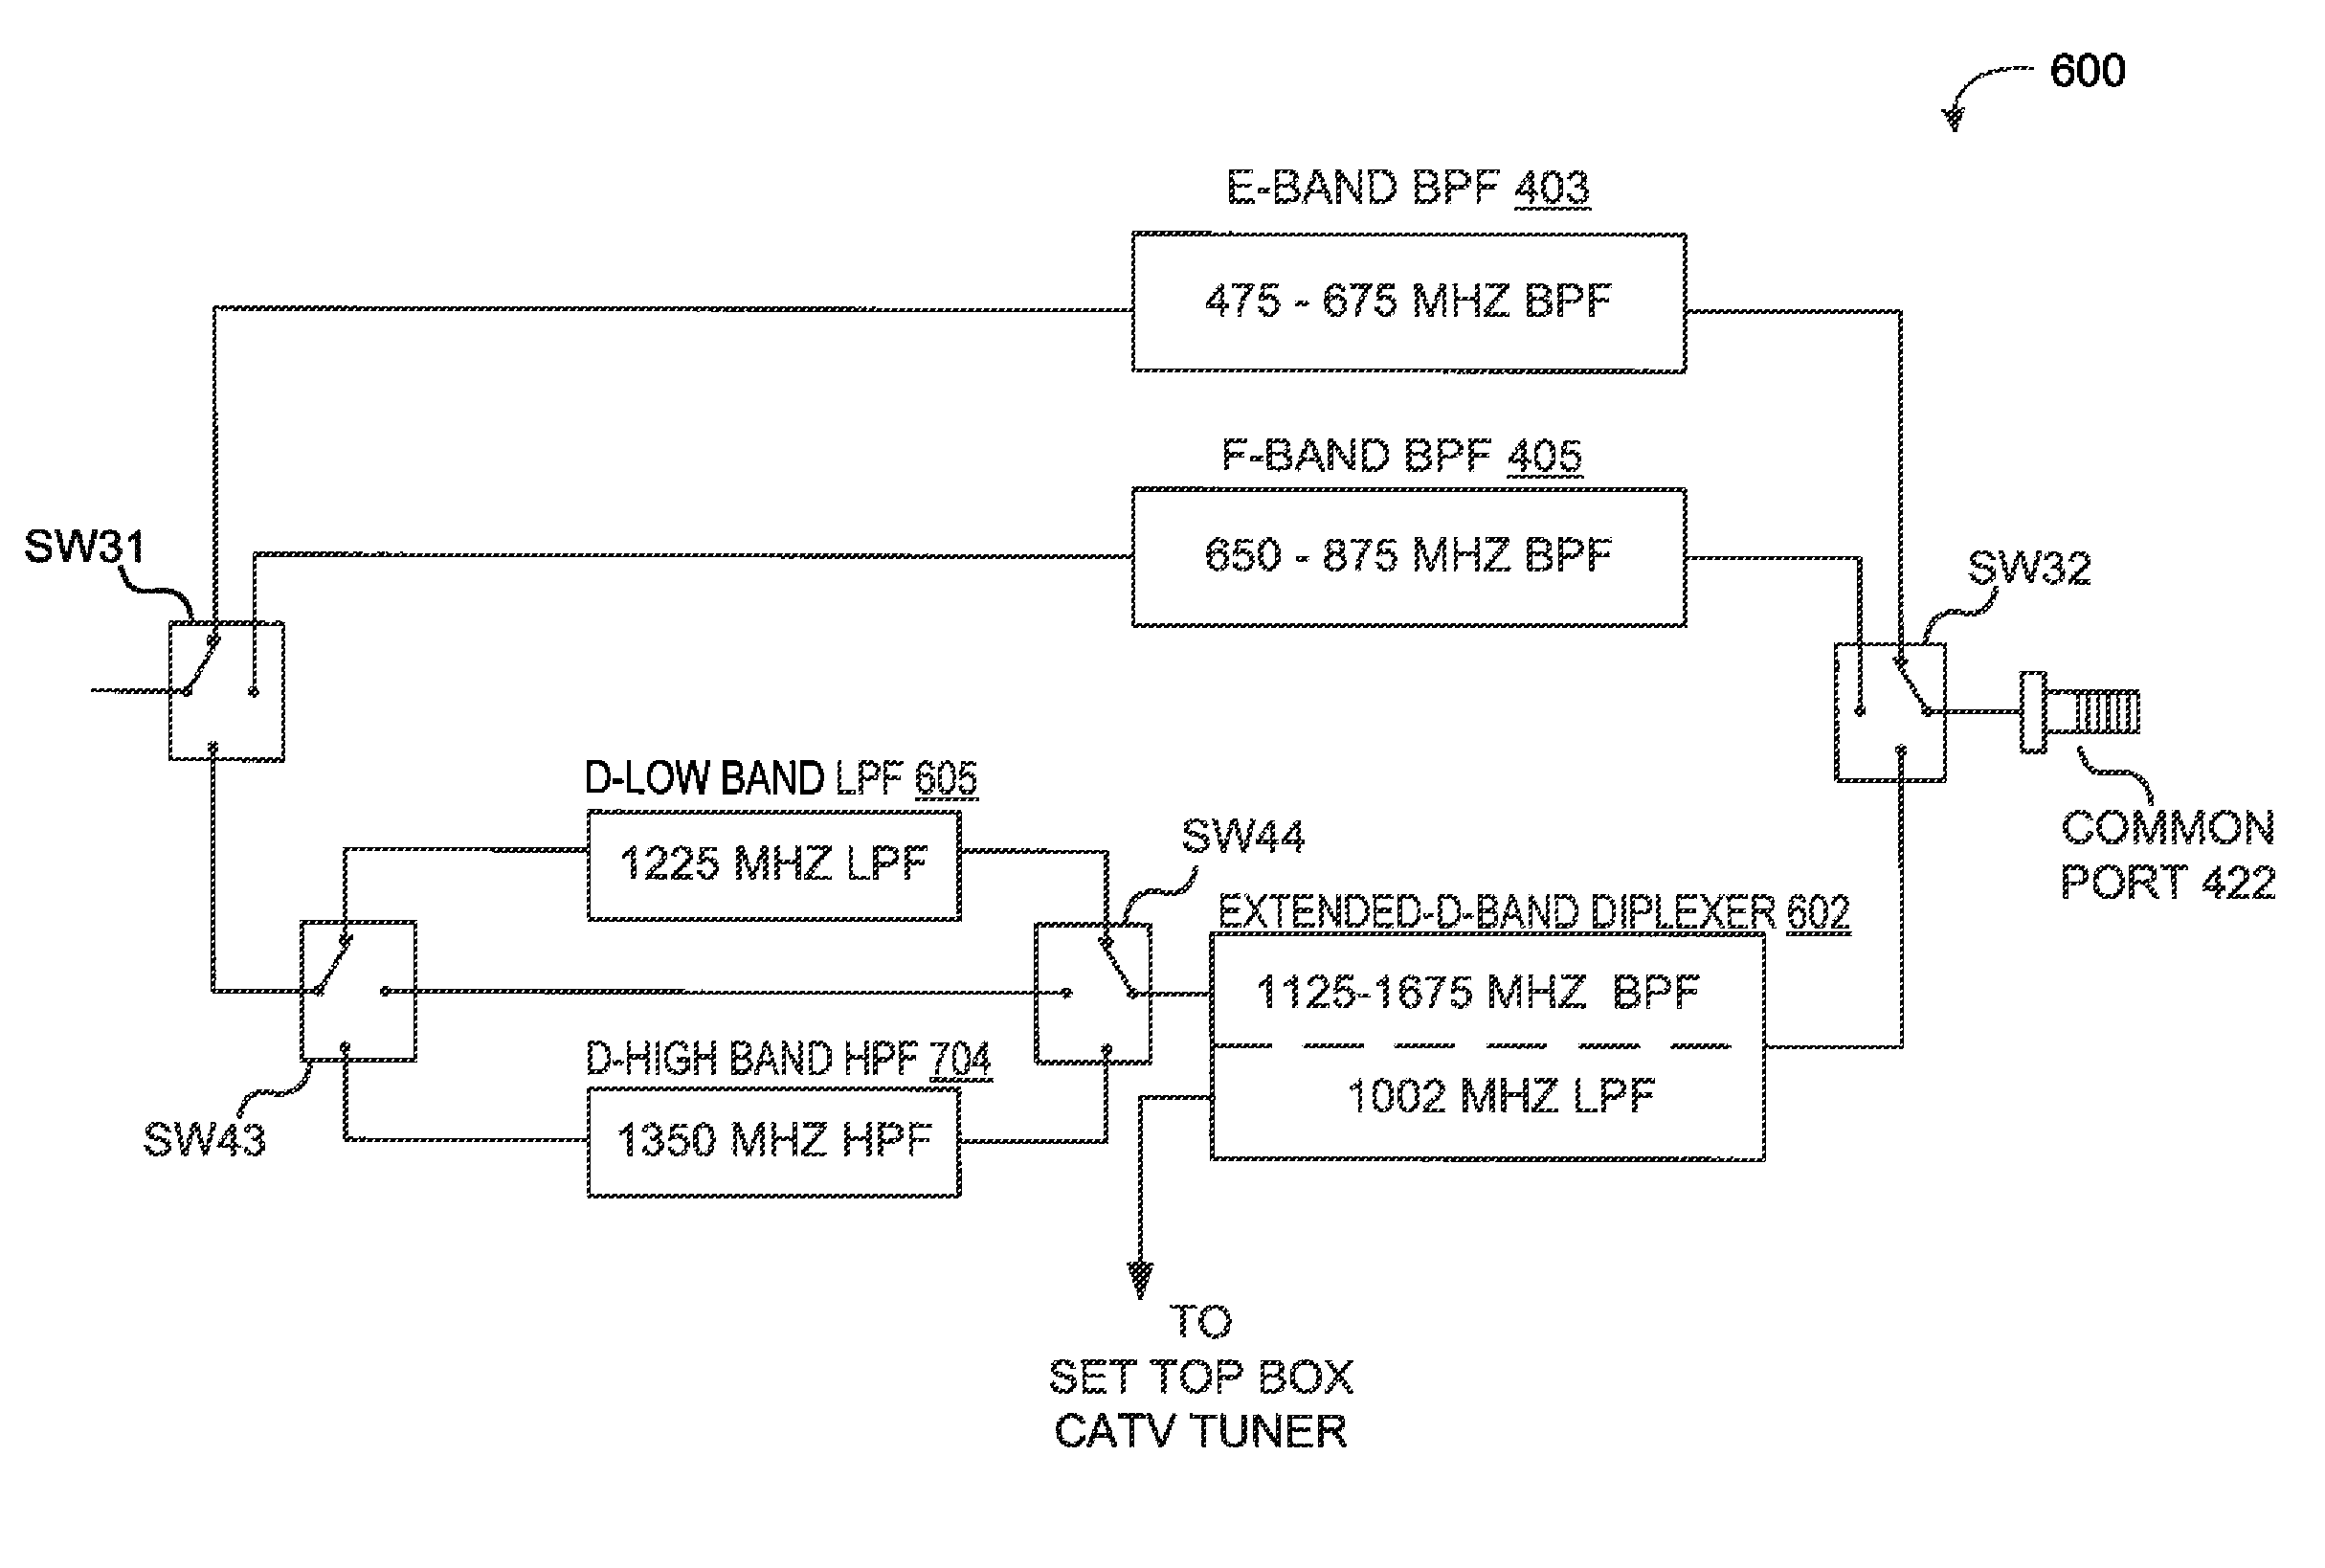 Switchable Diplexer With Physical Layout to Provide Improved Isolation